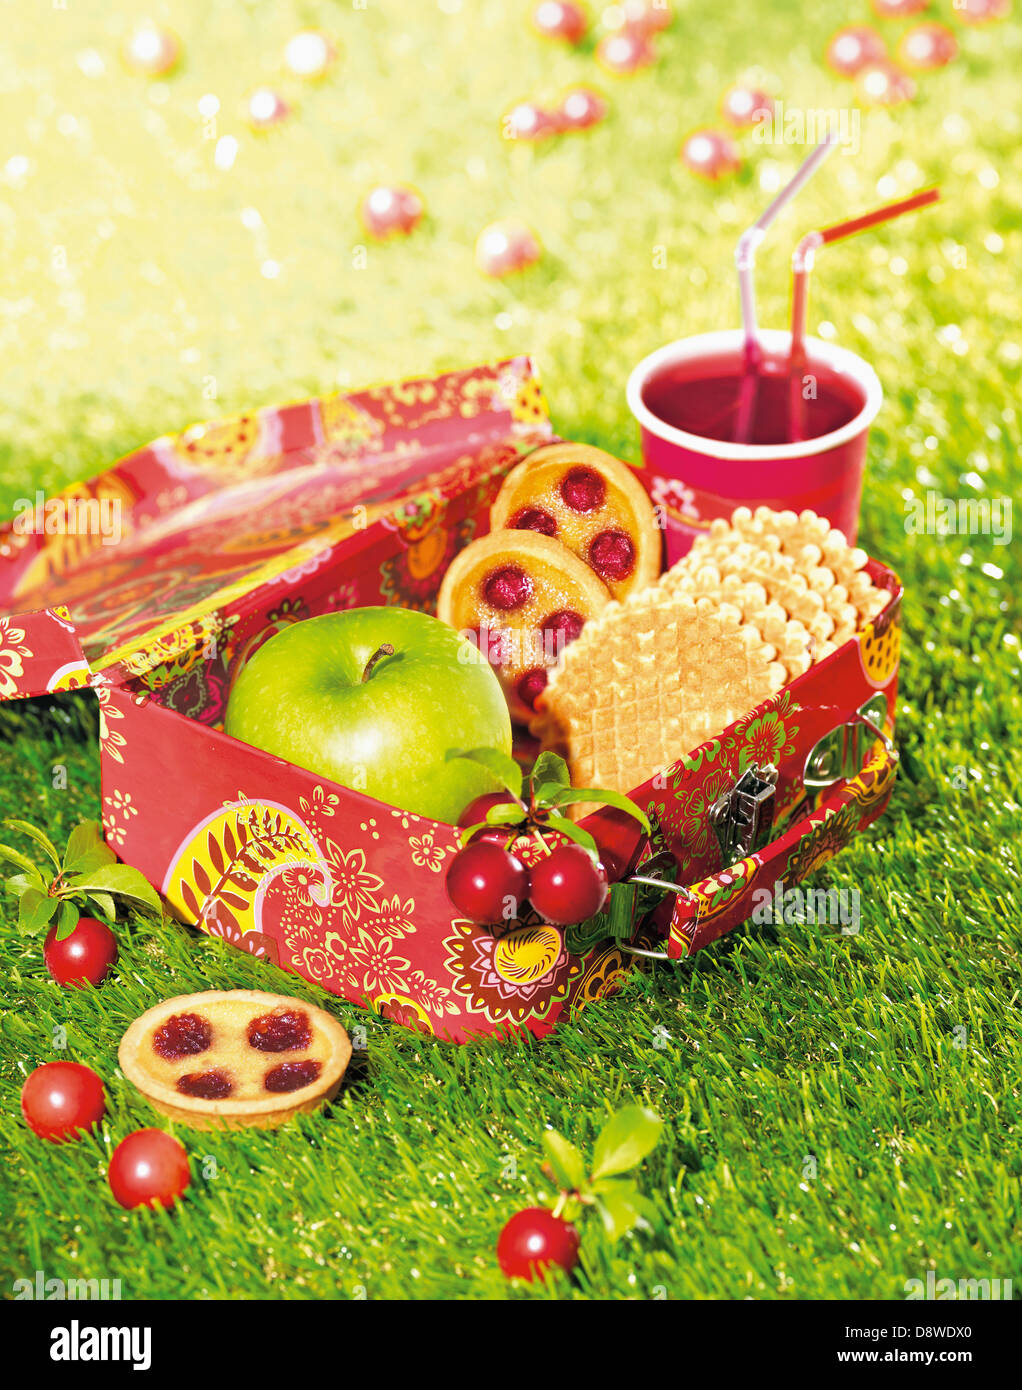 Cherry tartlets,waffles and an apple in a lunch box Stock Photo